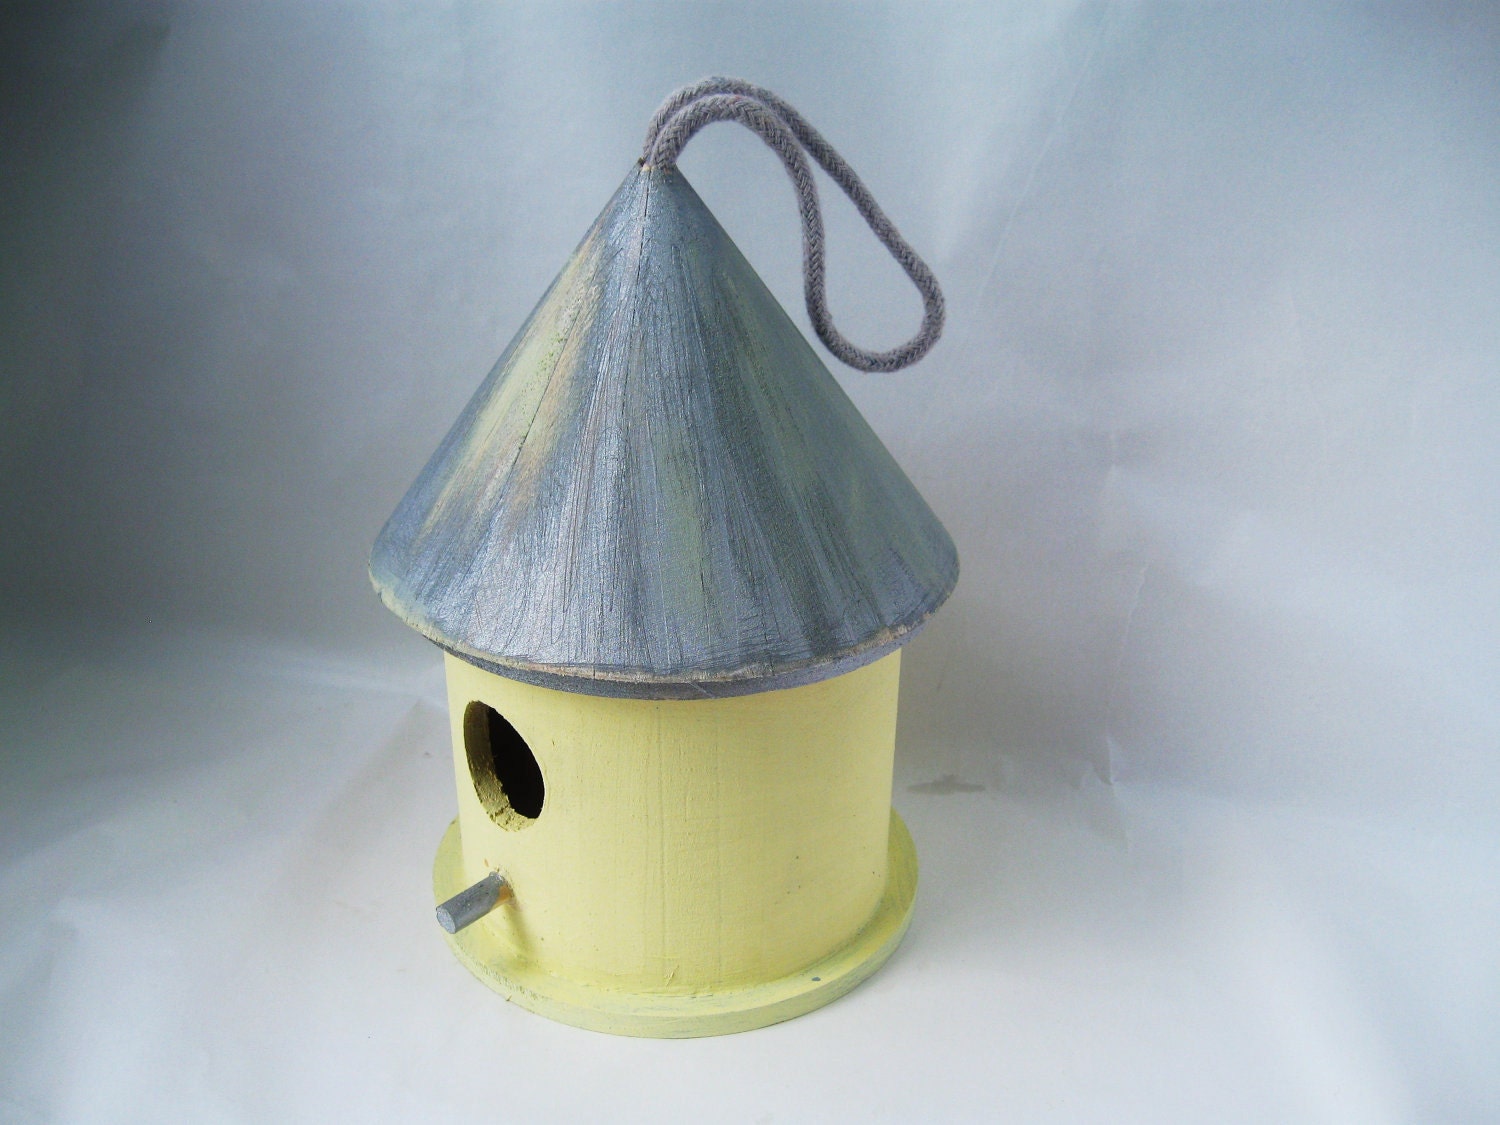 Rustic bird house, yellow and blue.  Feed the birds in style.